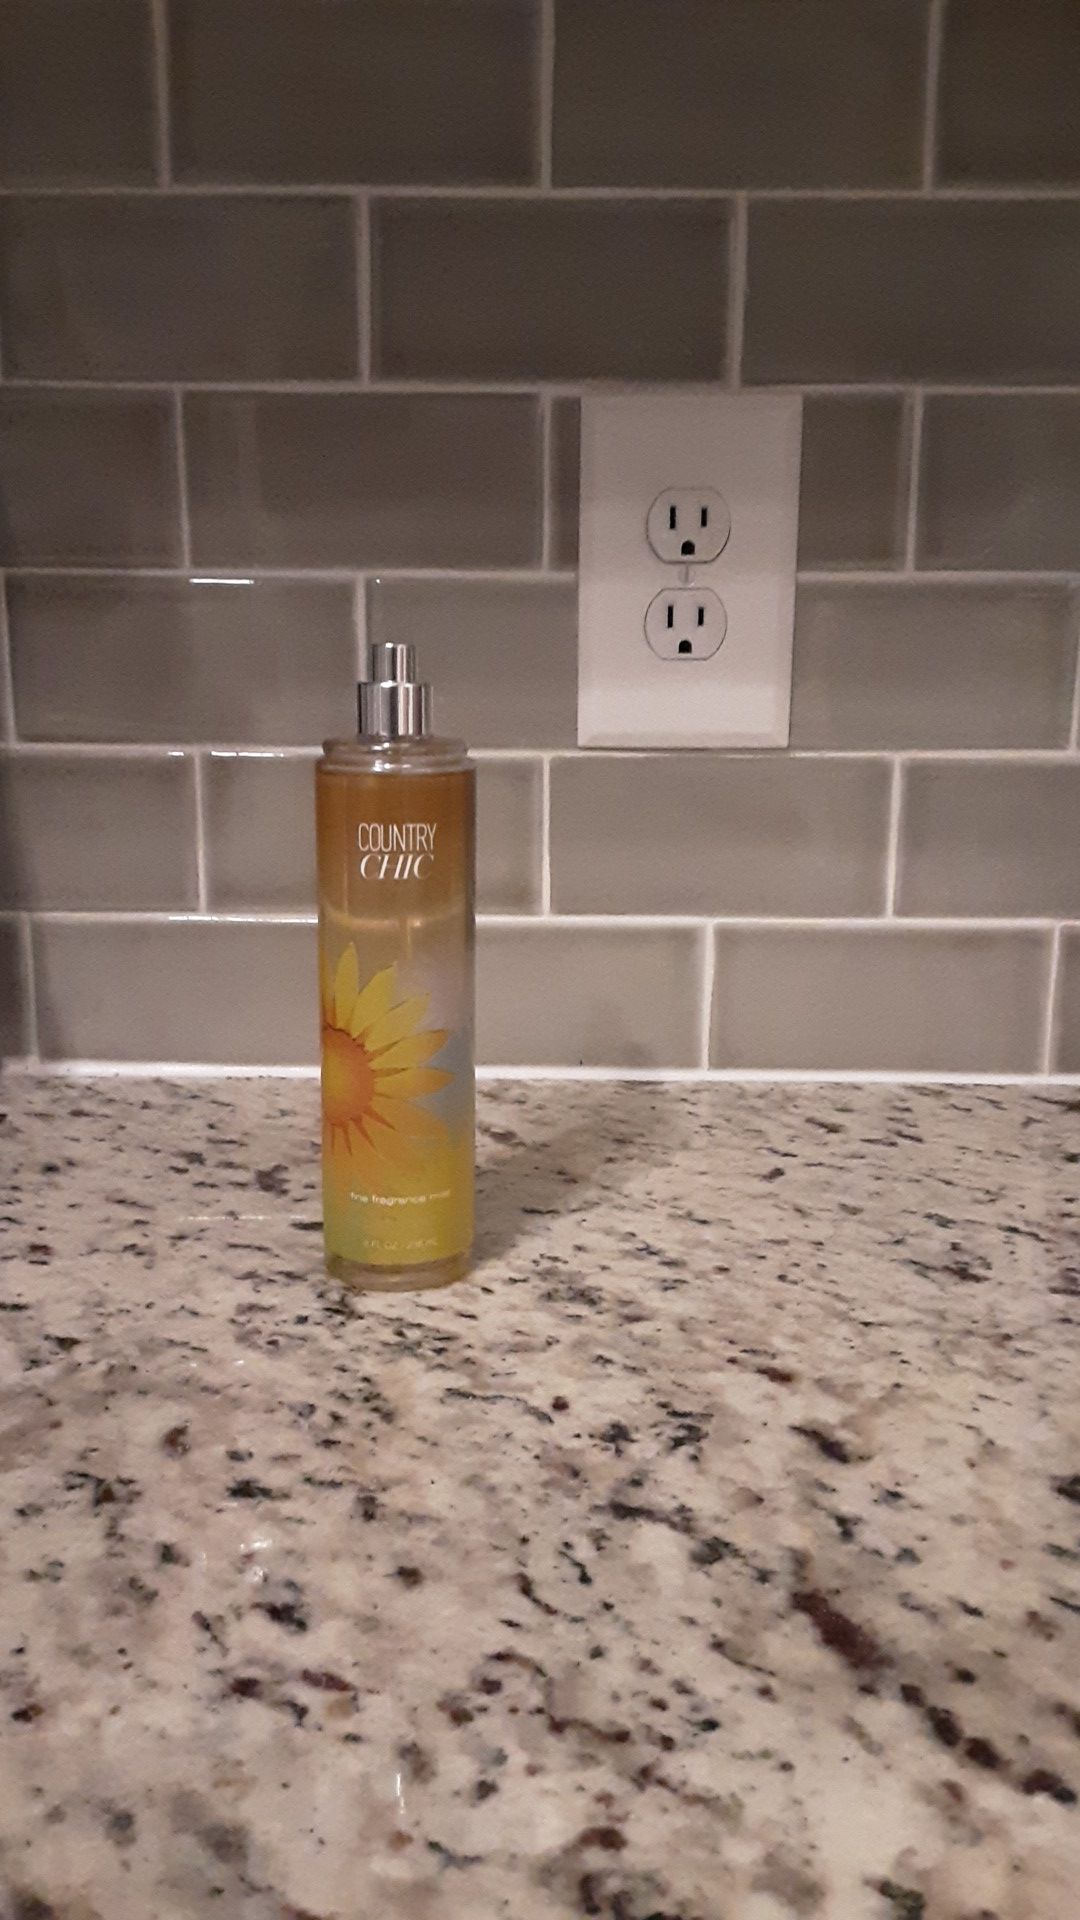 Bath and body works "Country Chic" mist